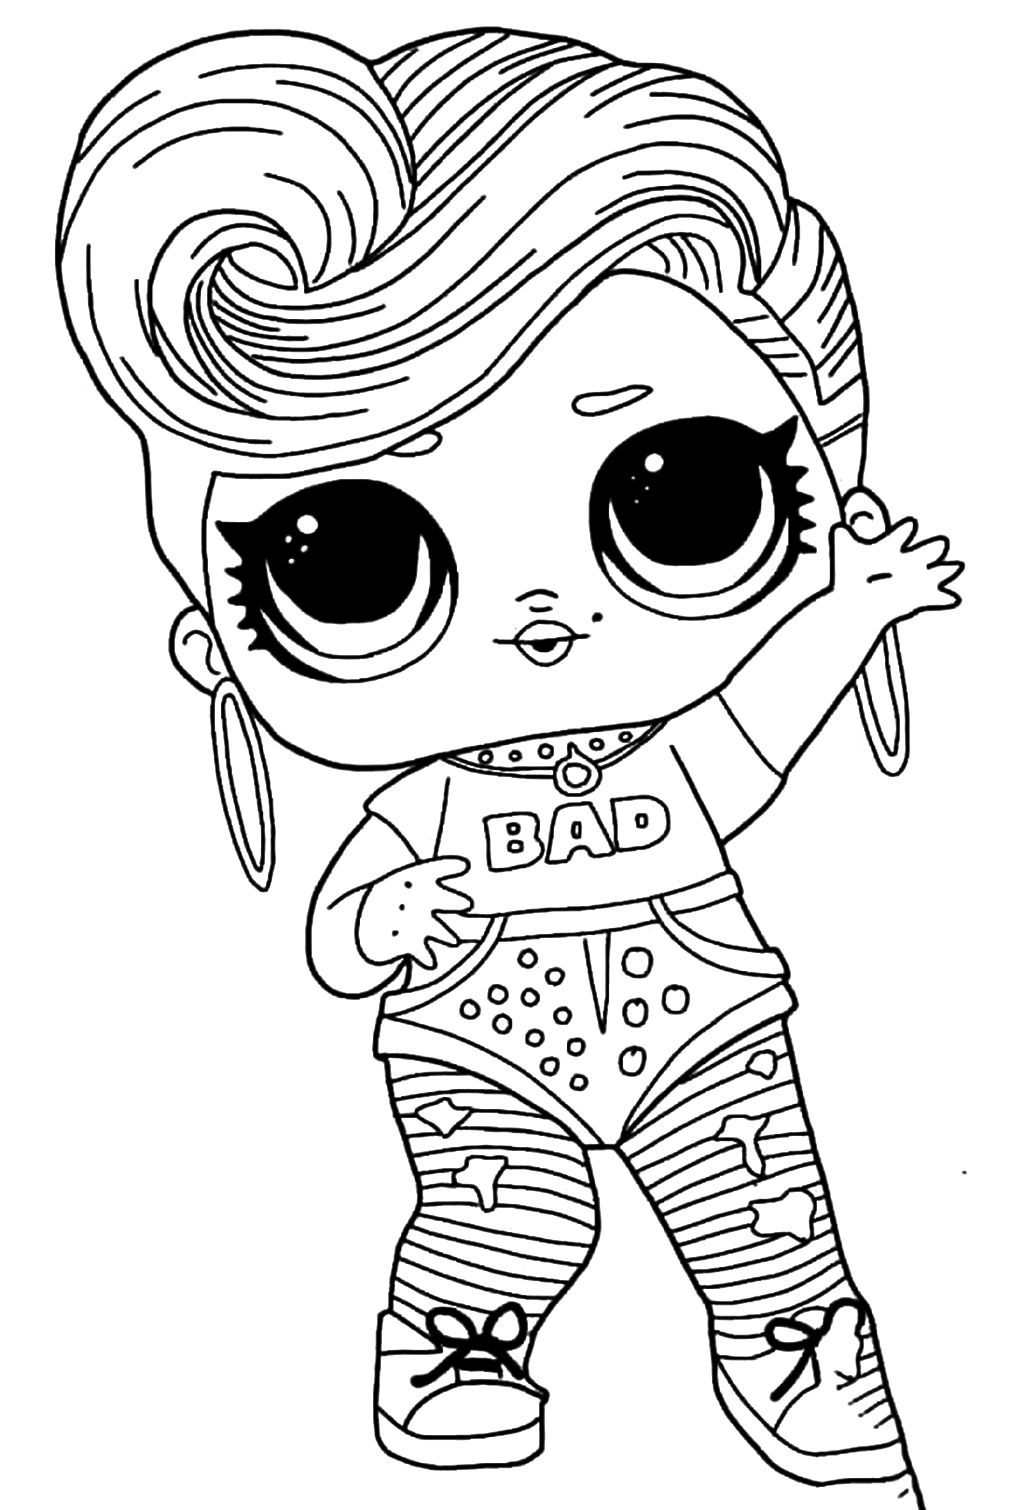 Cute Lol Surprise Doll Coloring Pages - Free Printable Coloring Pages